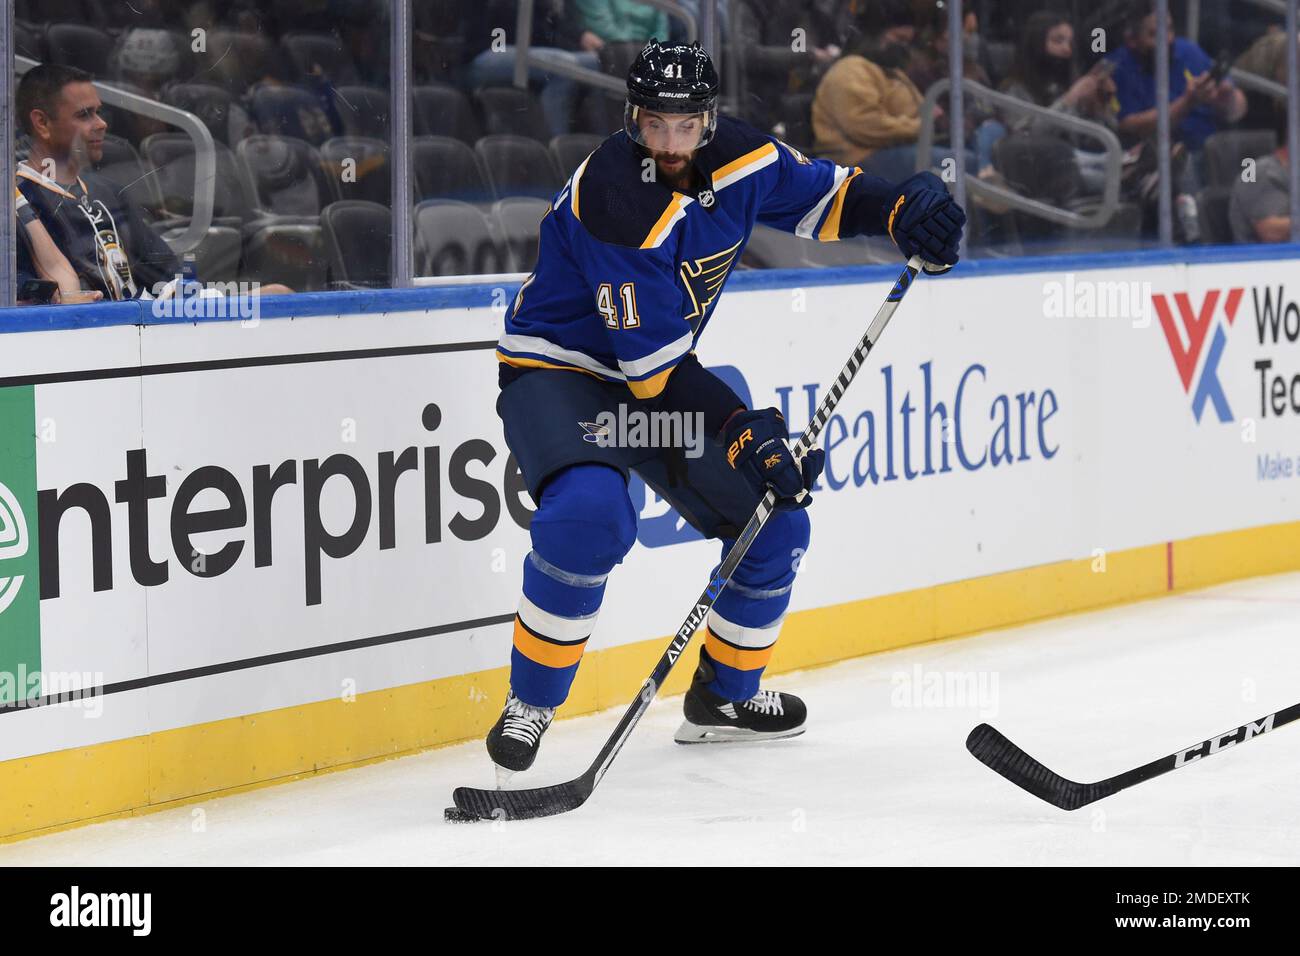 St. Louis Blues Robert Bortuzzo (41) in action against the Minnesota Wild during the first period of a preseason NHL hockey game Saturday, Sept. 25, 2021, in St